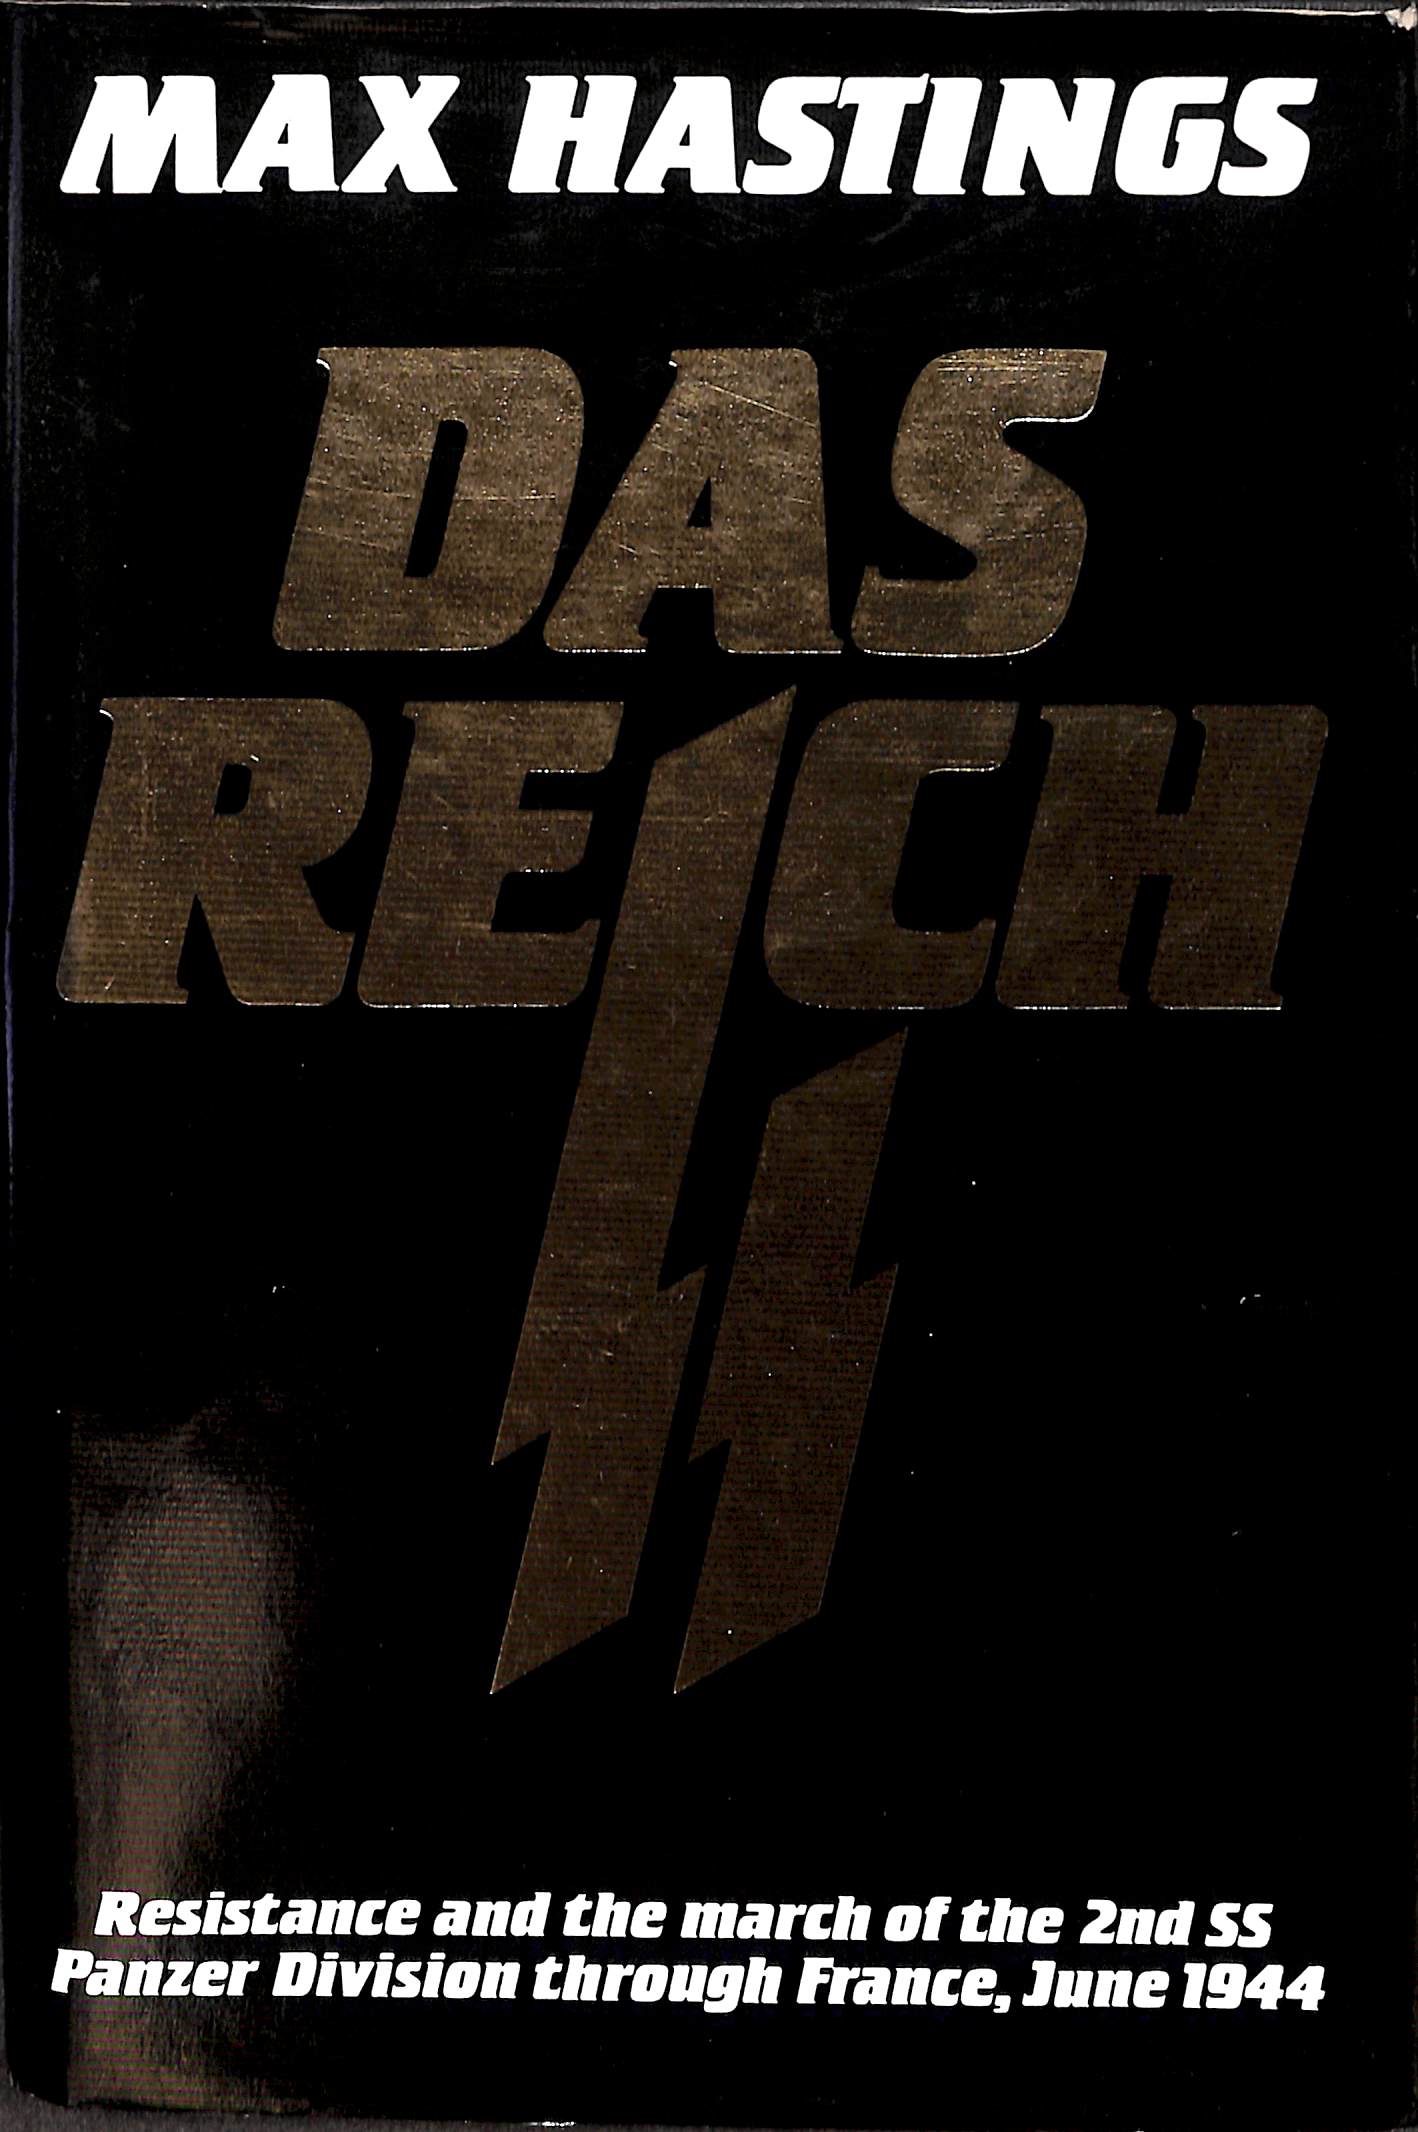 Das Reich ; Resistance and the March of the 2nd SS Panzer Division Through France June 1944 - Hastings, Max